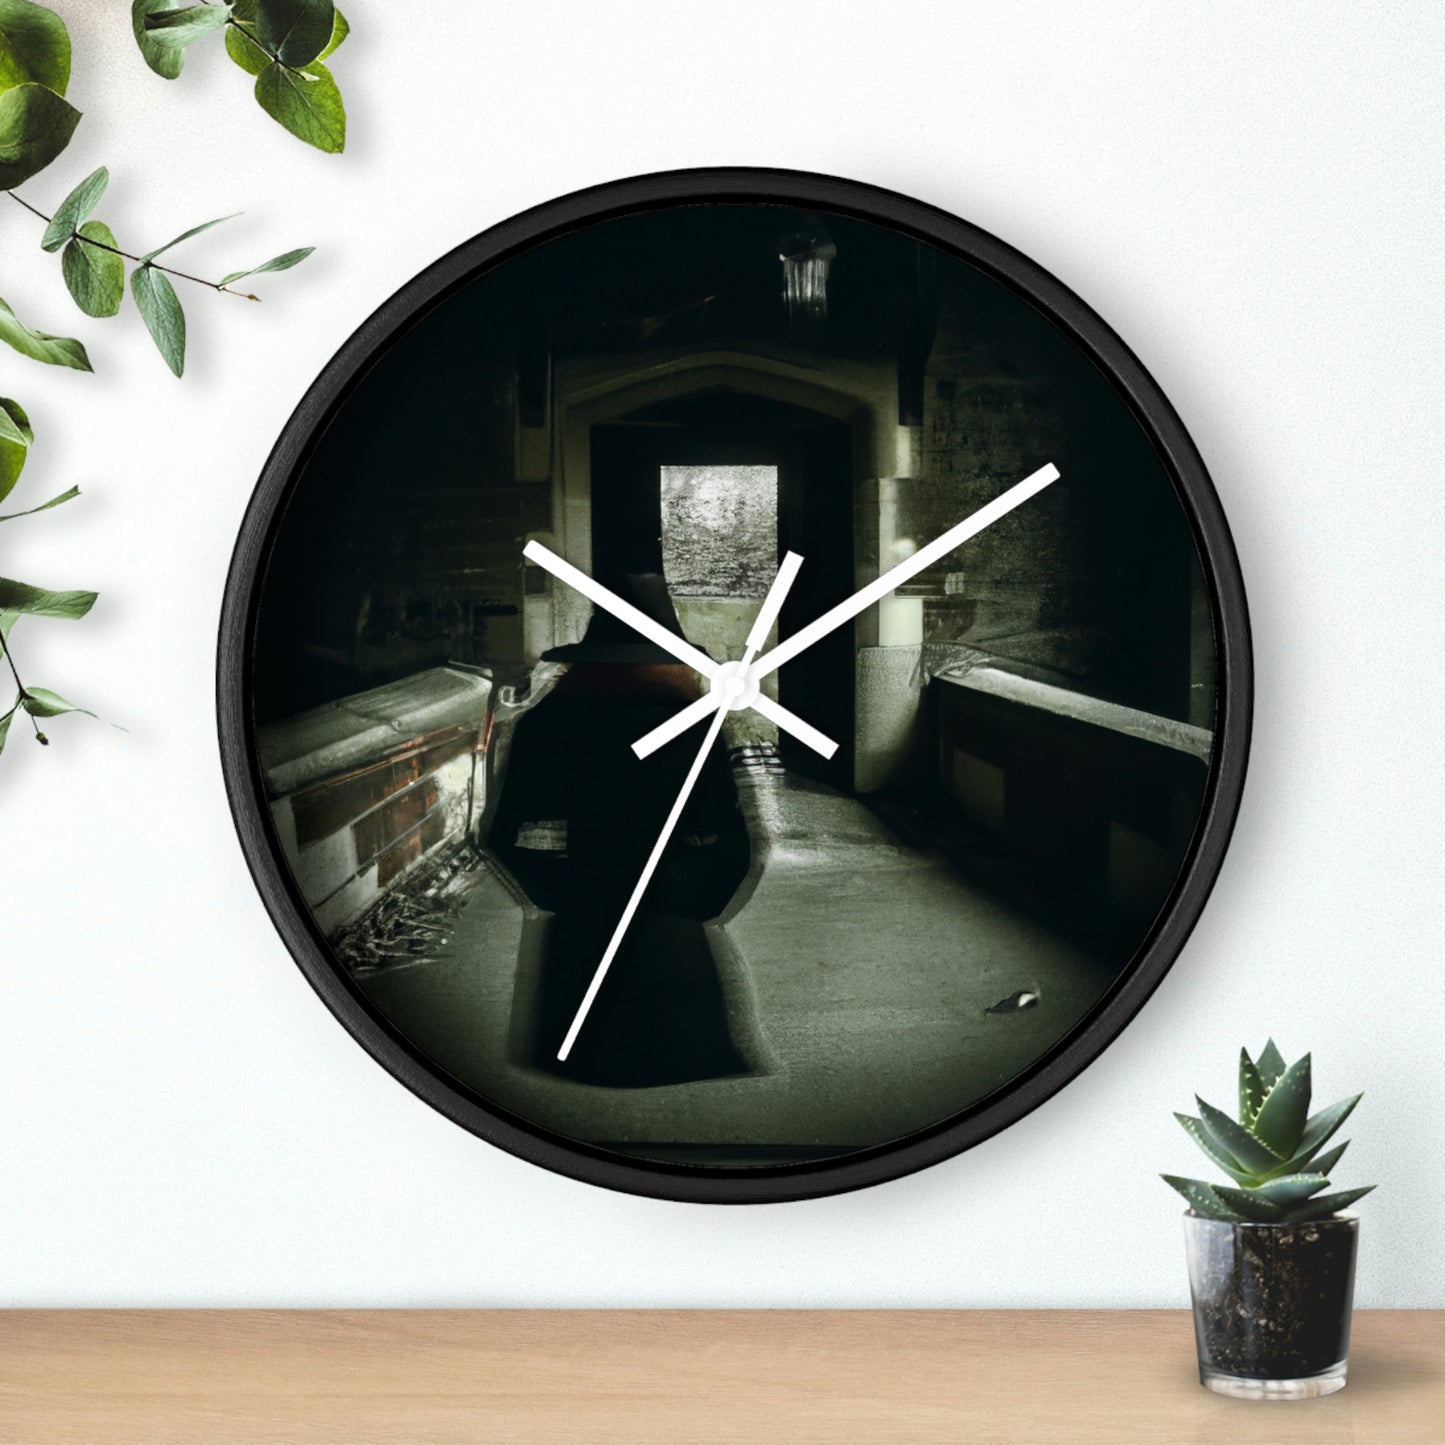 "The Enigmatic Visitor of the Ancient Castle" - The Alien Wall Clock